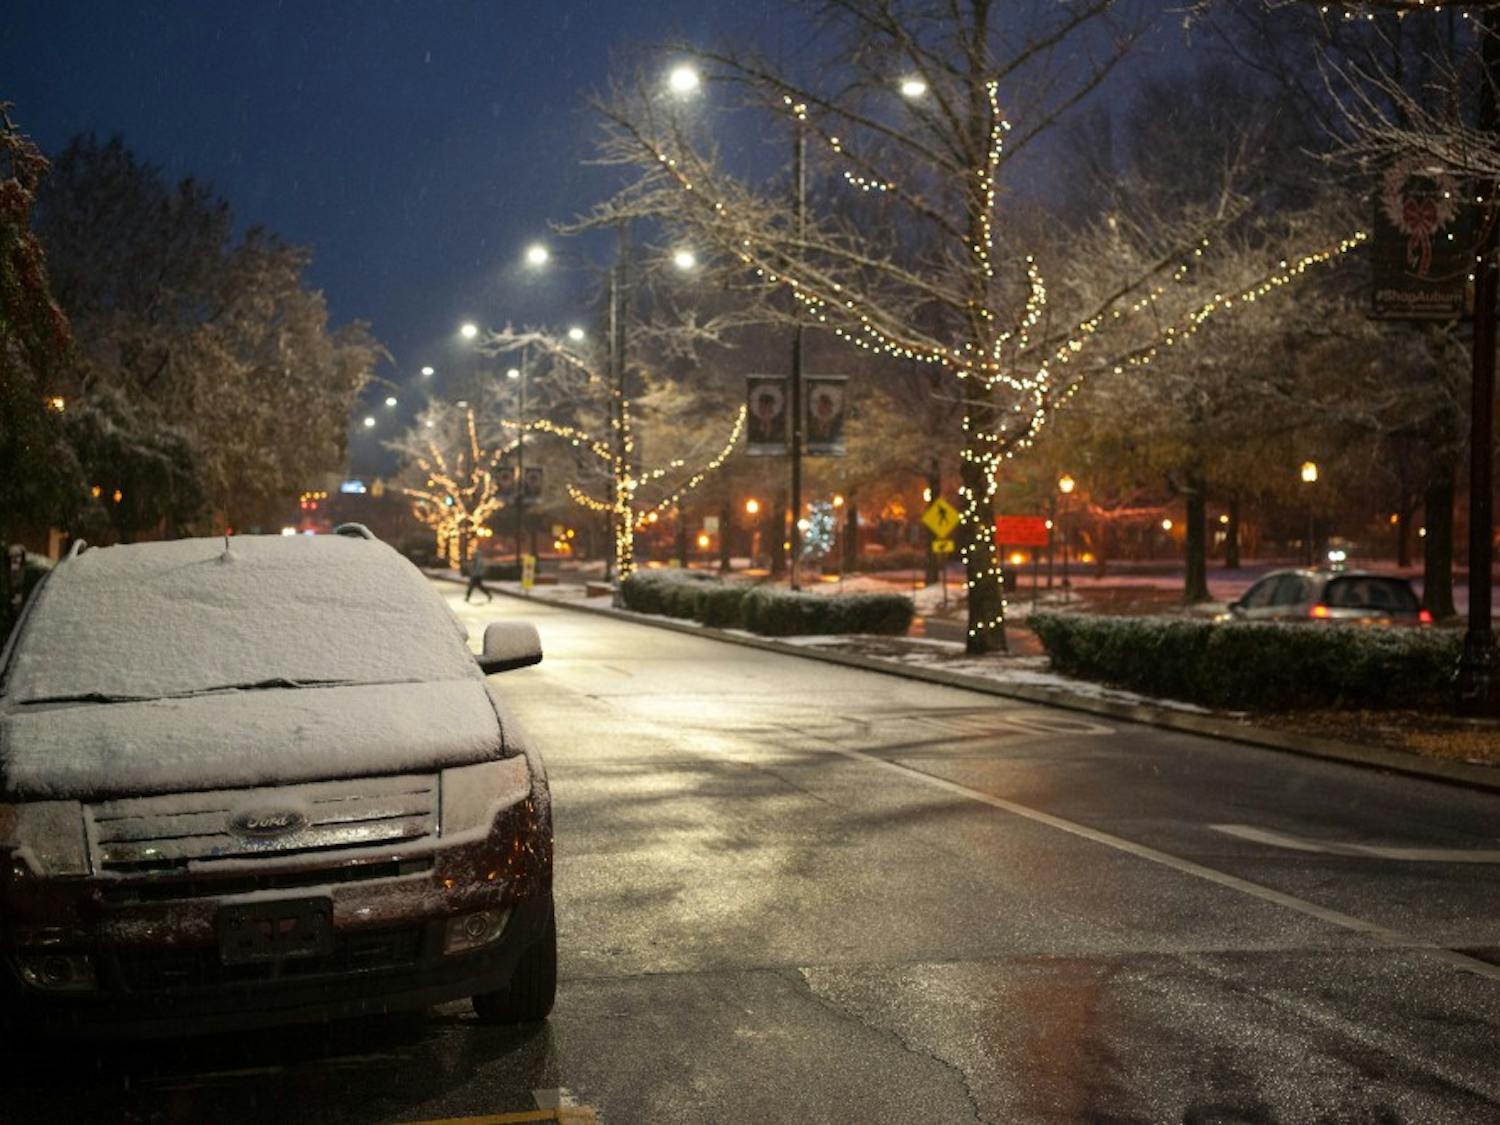 Snow sits on a car in downtown Auburn during the Christmas season.